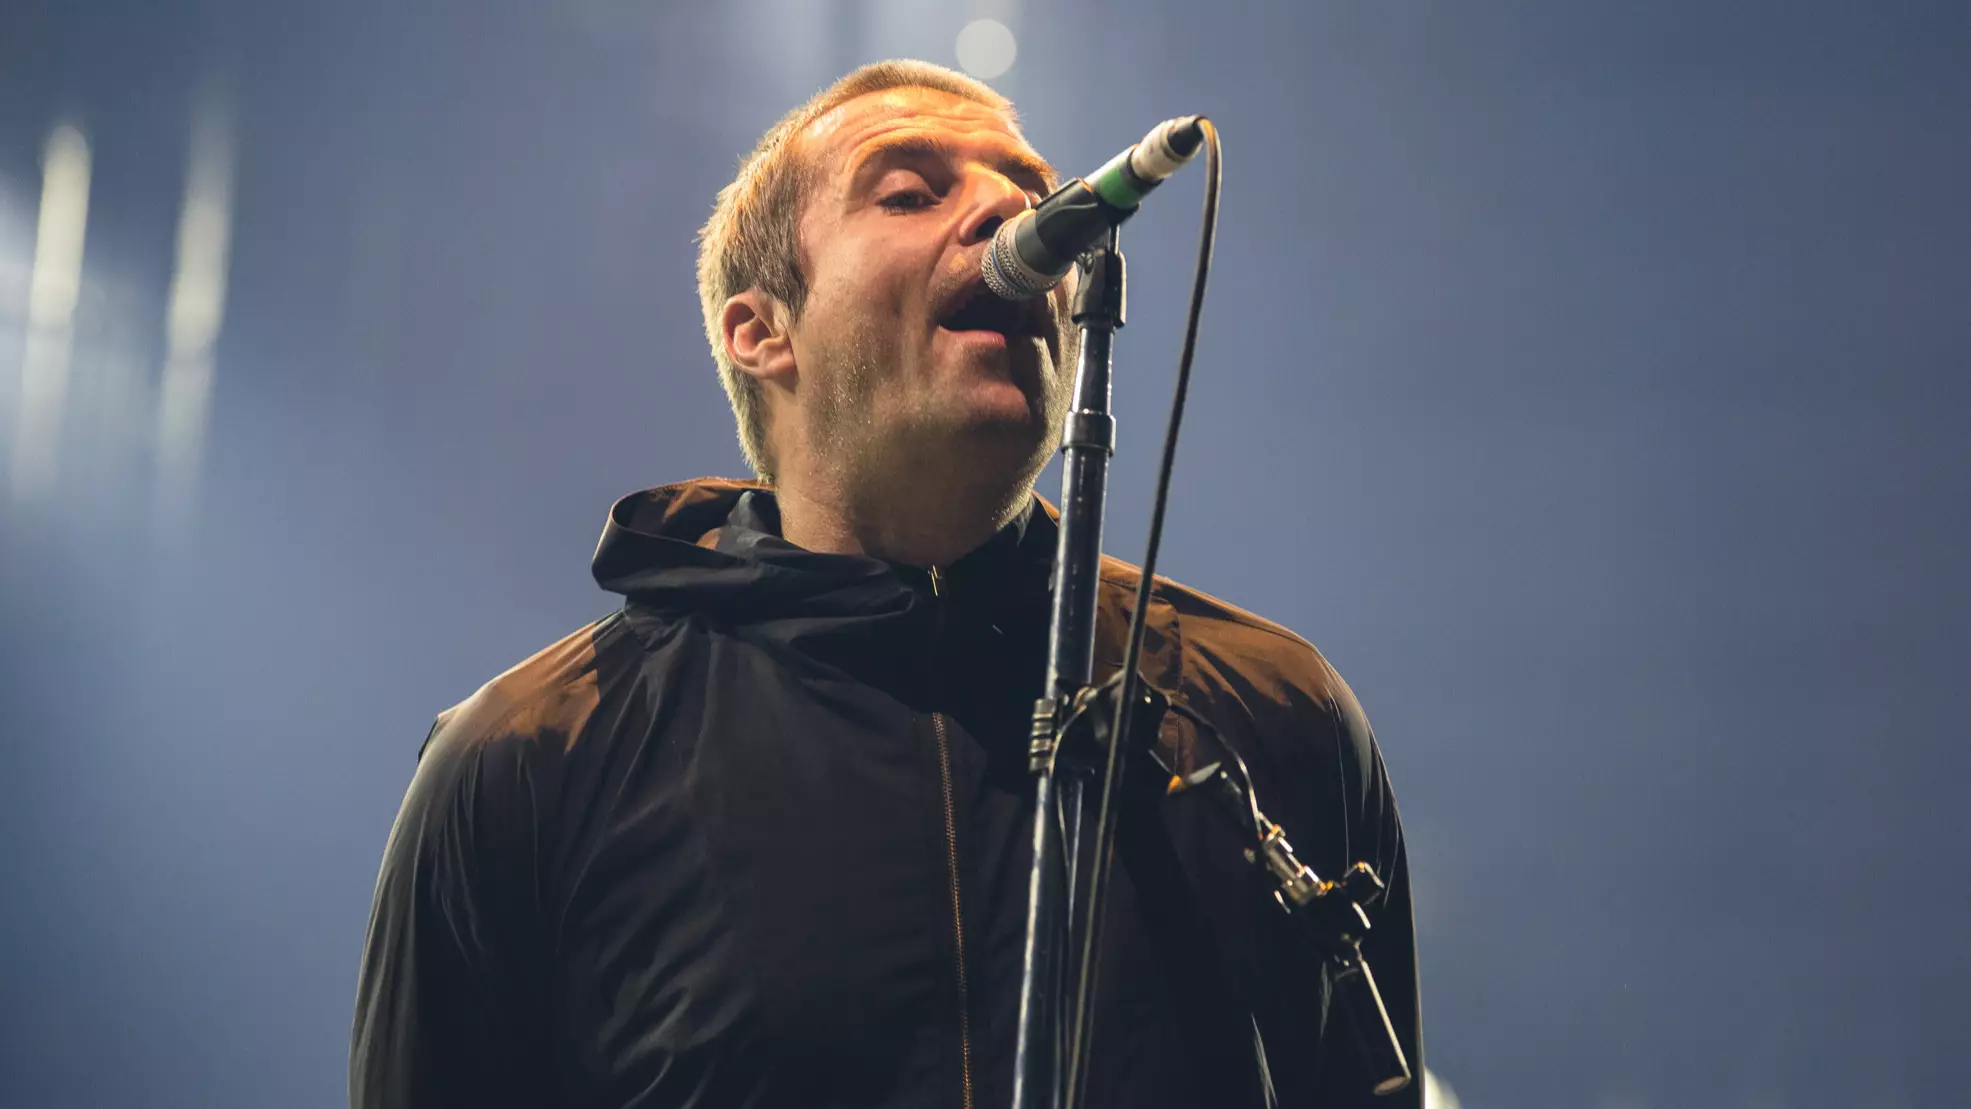 Liam Gallagher Drags Melbourne For Cutting Him Off On Last Song Due To Music Curfew